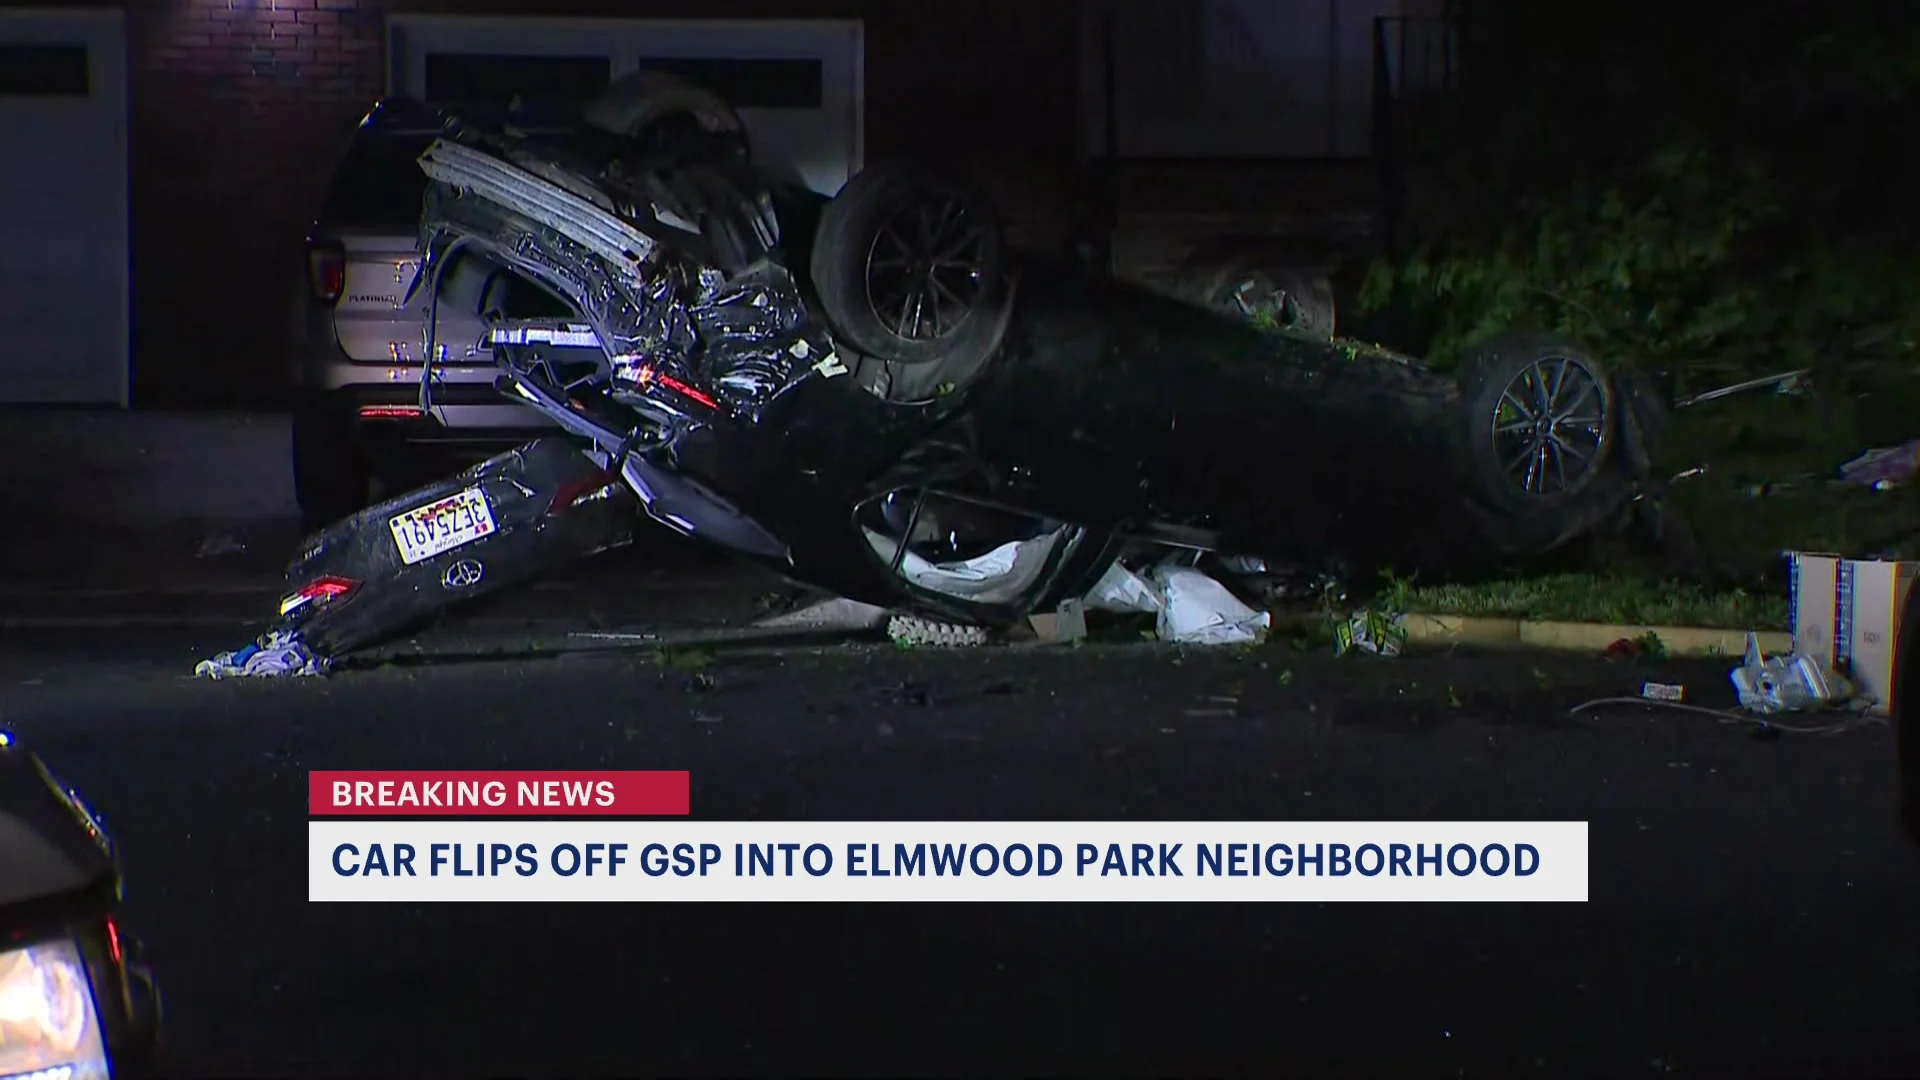 Car flips off Garden State Parkway in Elmwood Park, narrowly misses hitting a house